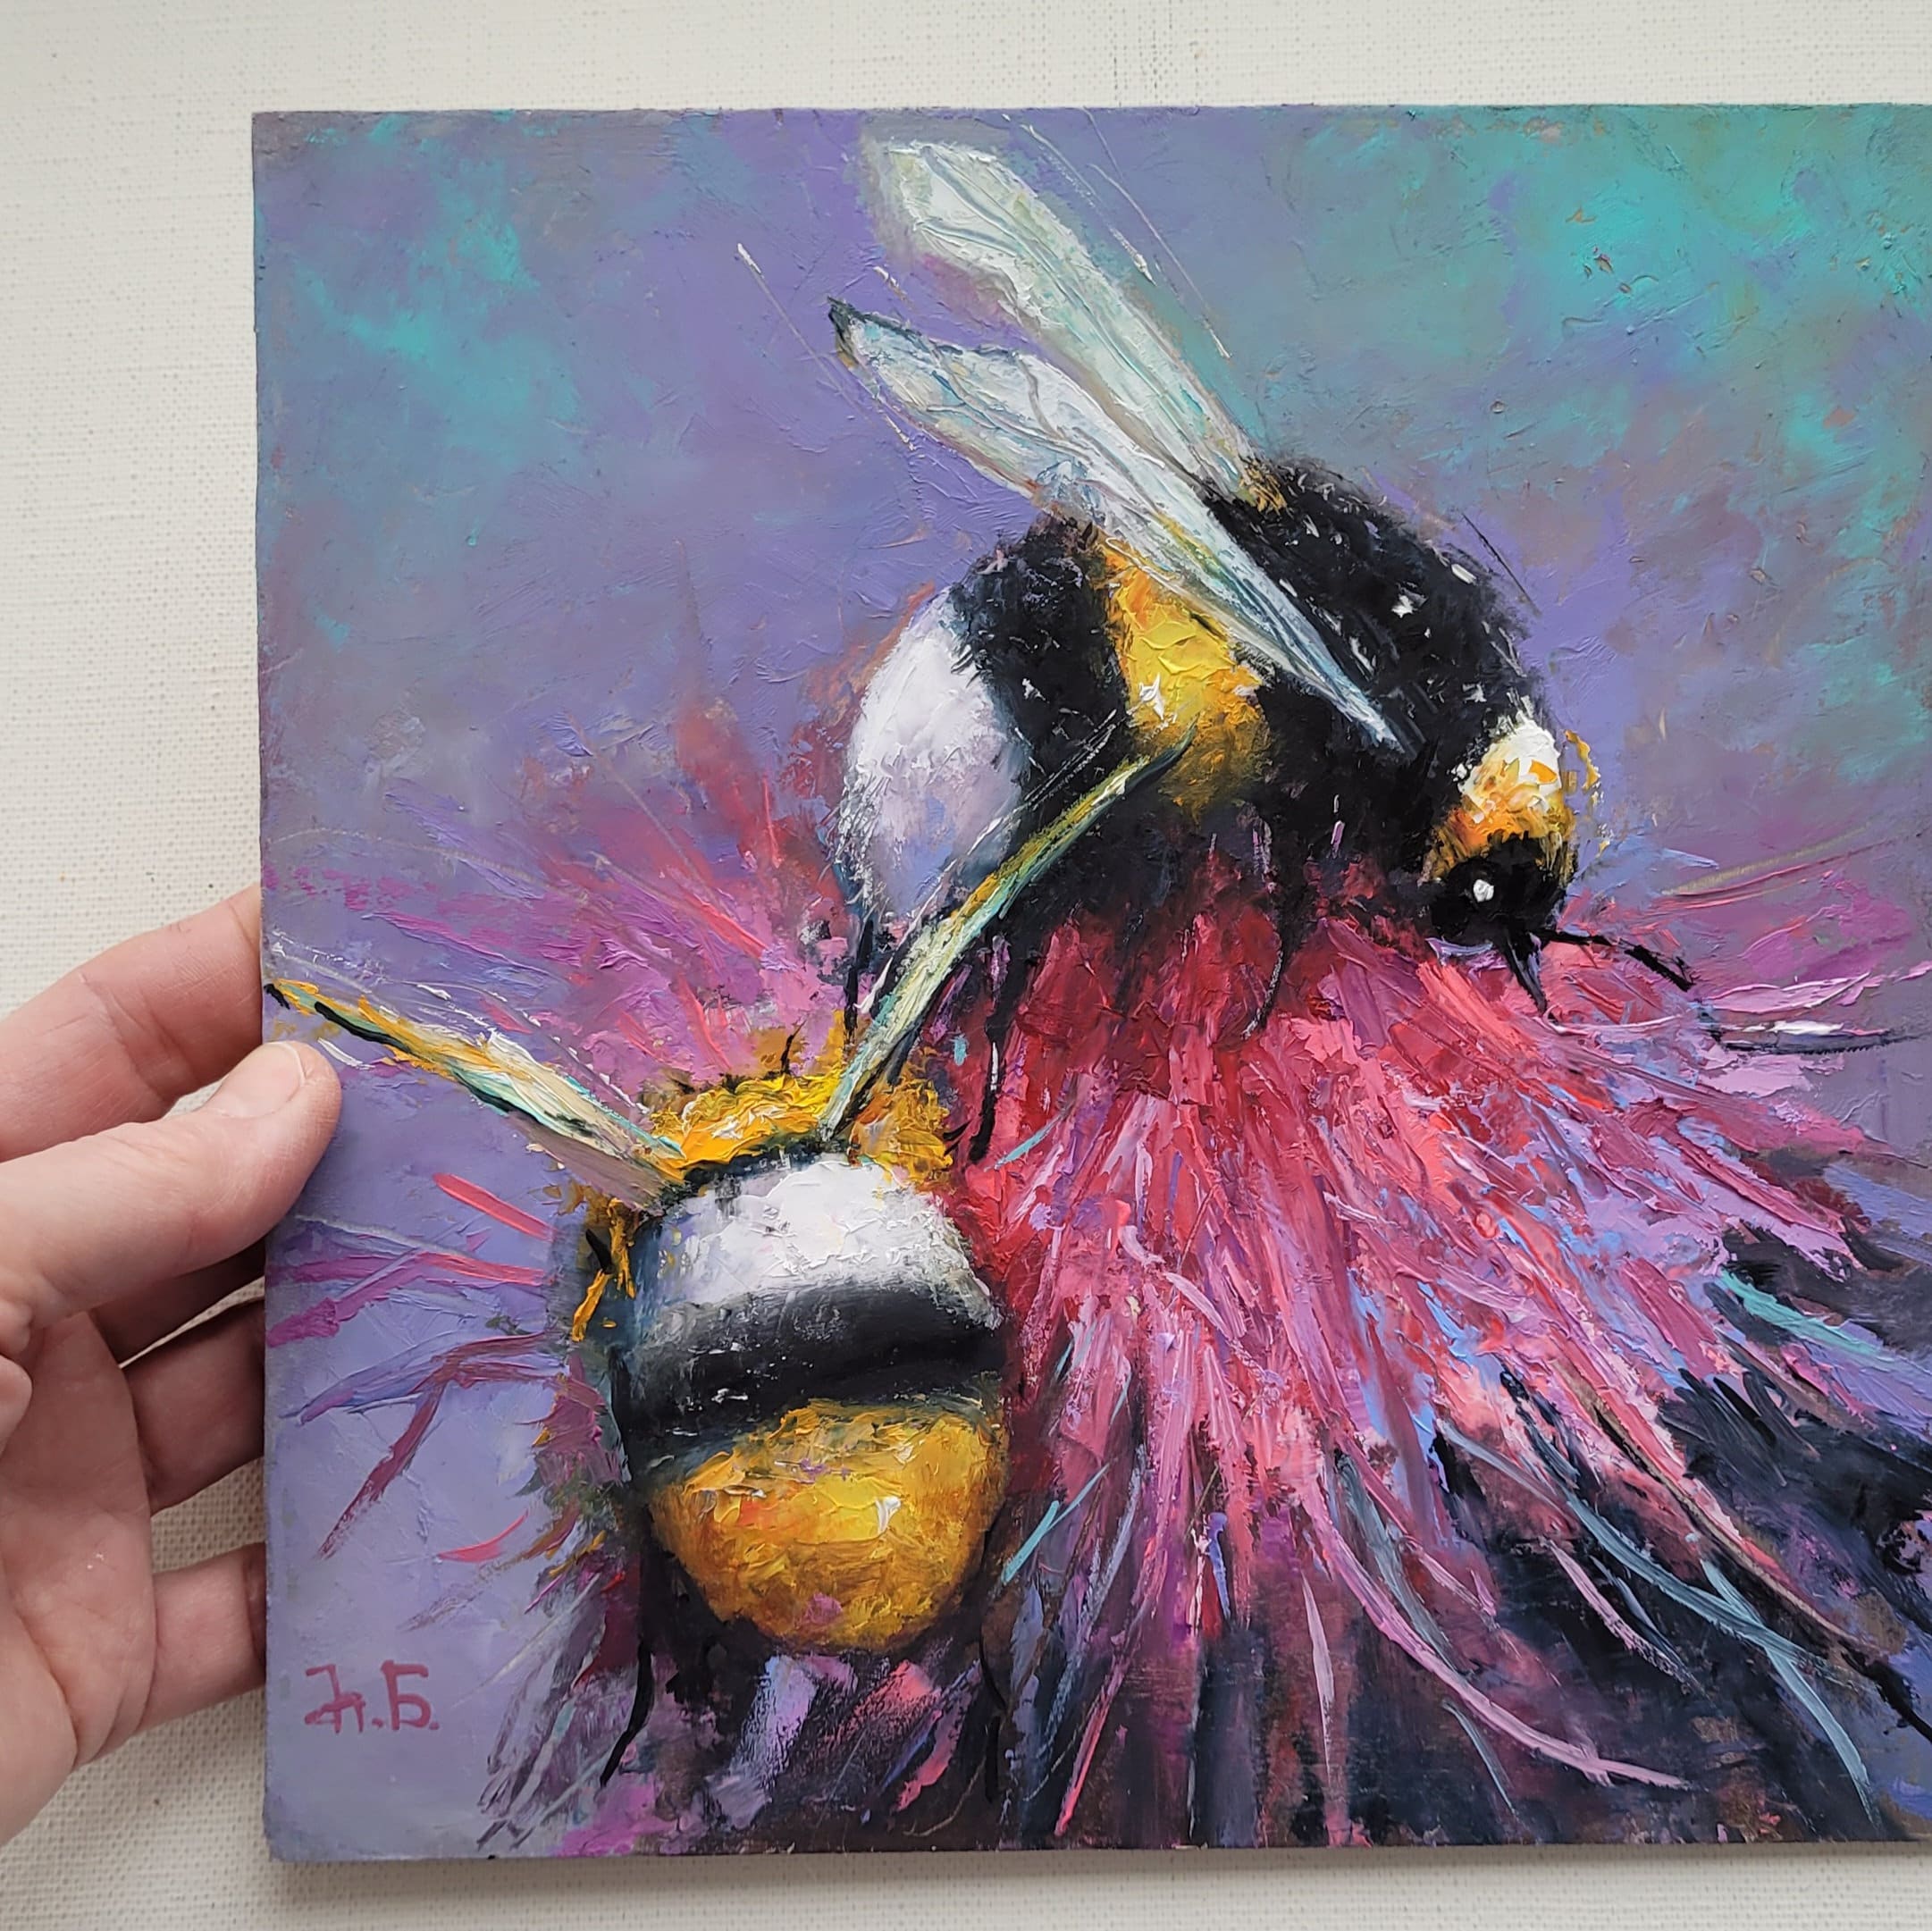 Watercolor original bumblebee room decor bee painting art by Anne